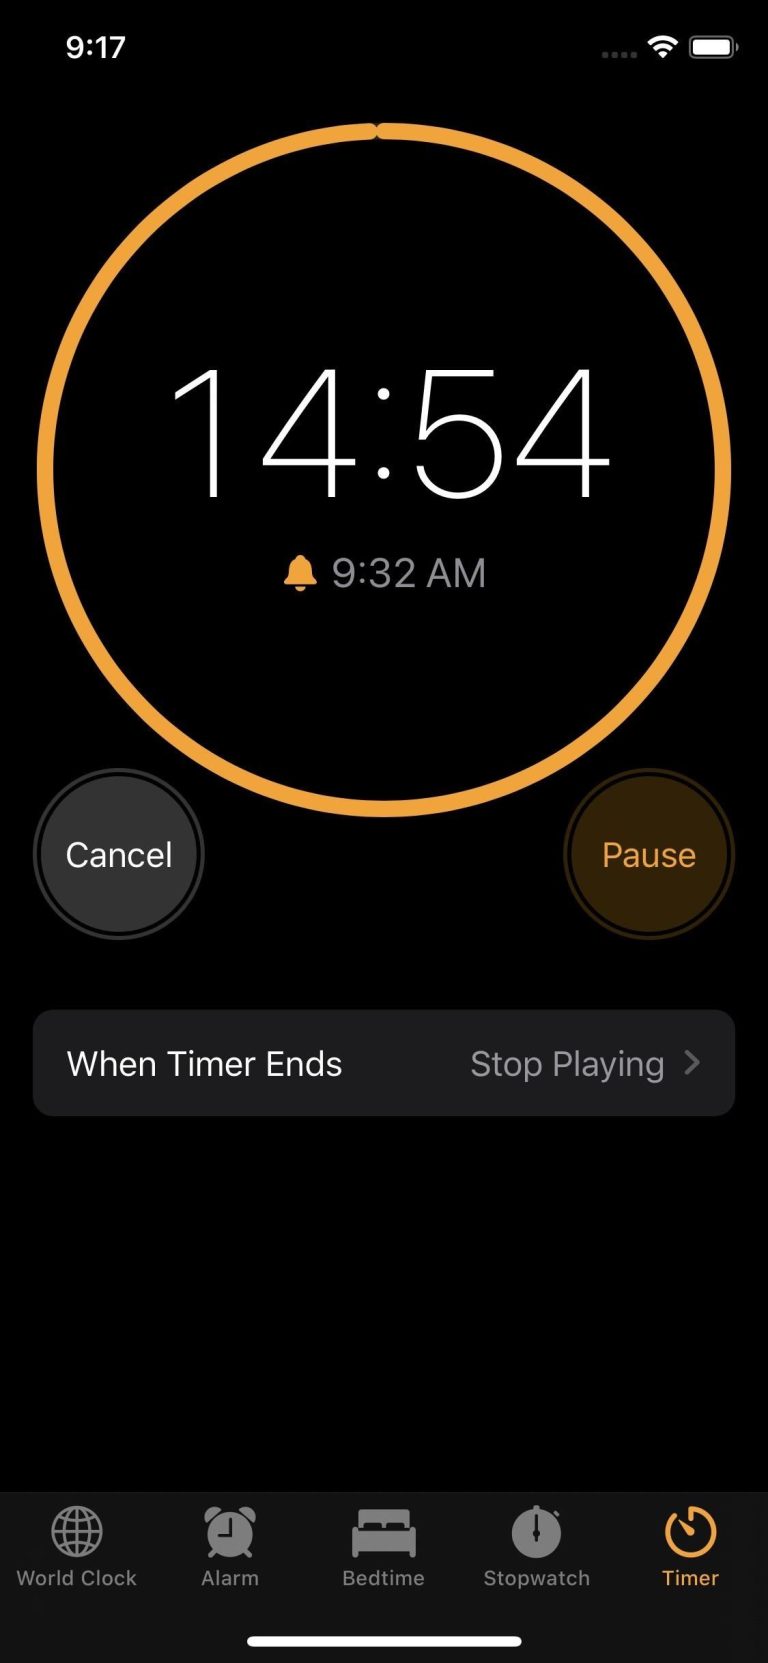 How Can I Activate The Sleep Timer For The Harry Potter Audiobooks?